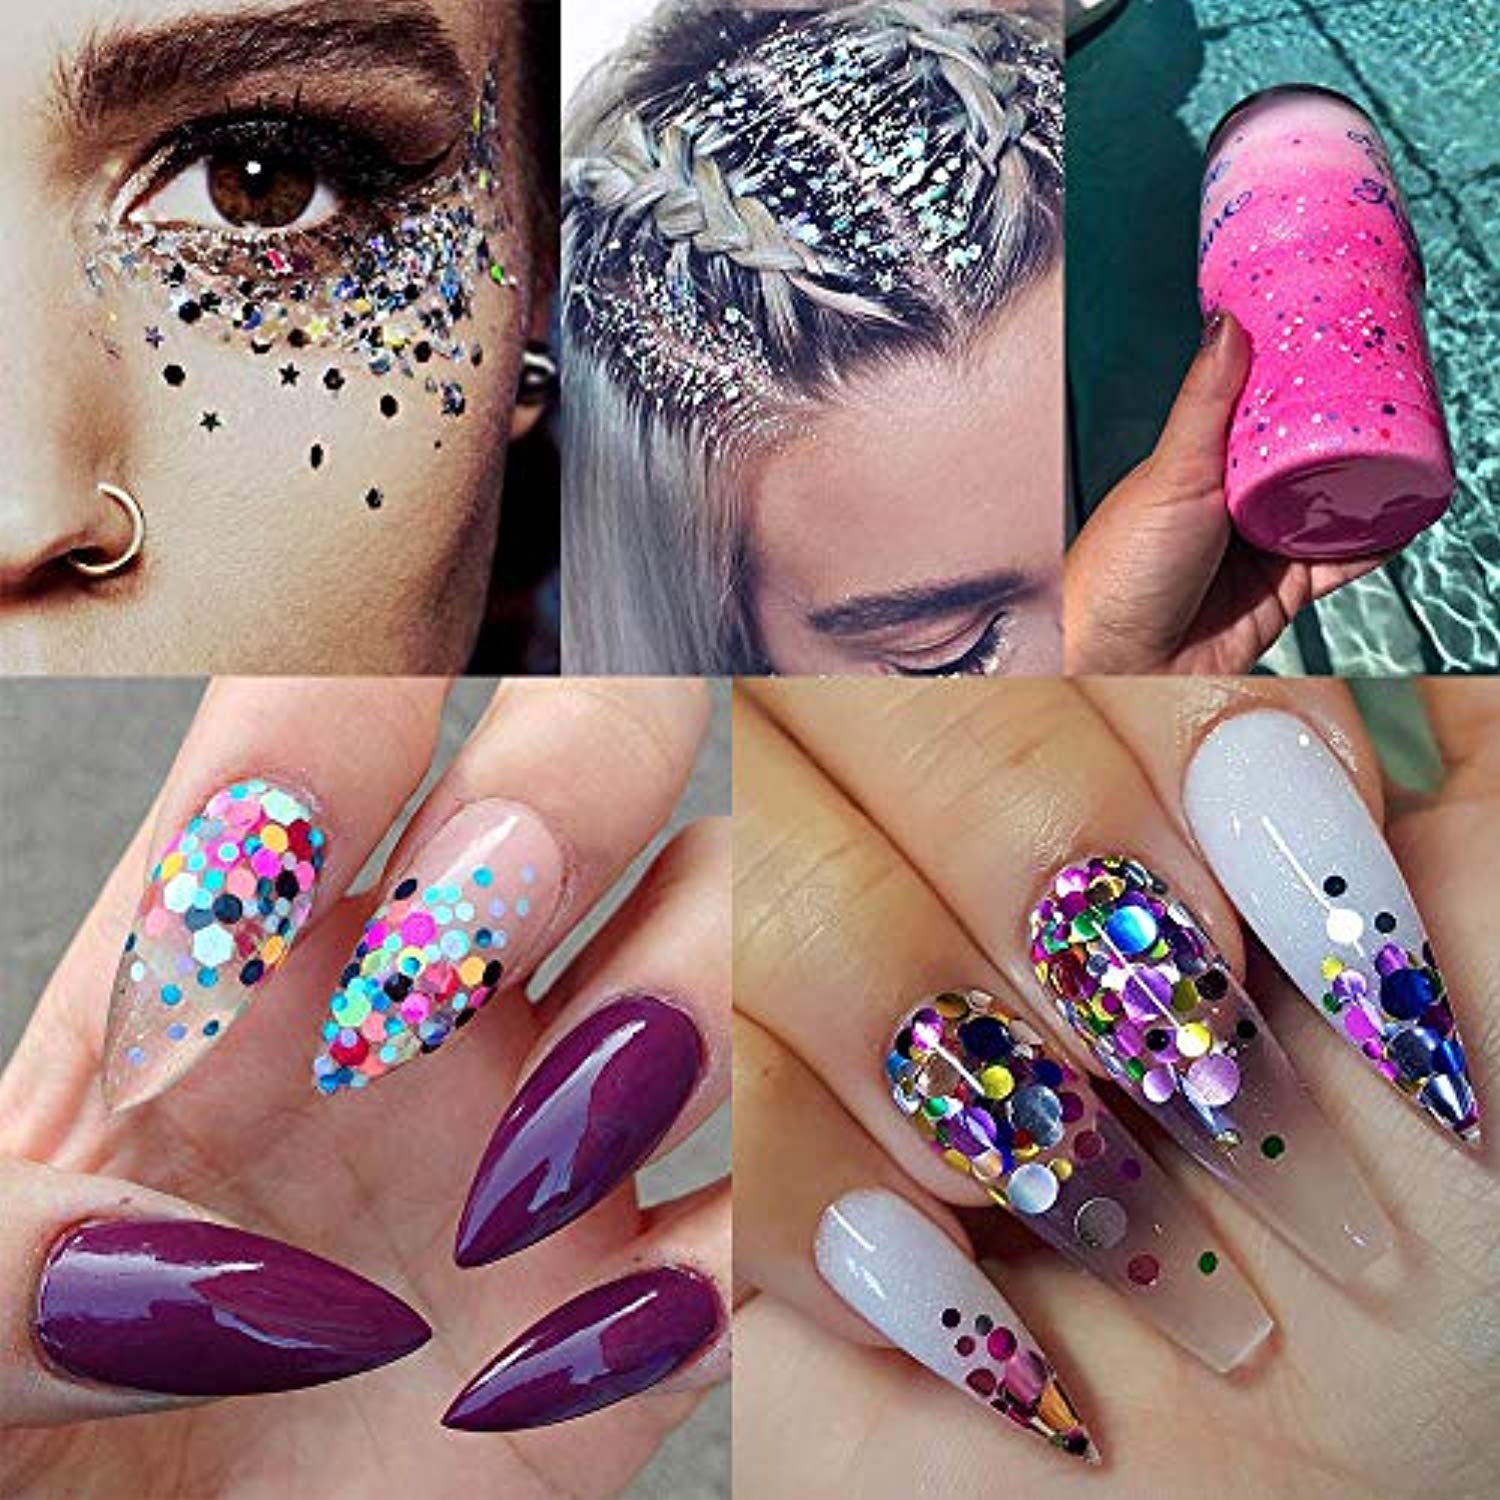 Colorful Mix Nail Art Stickers